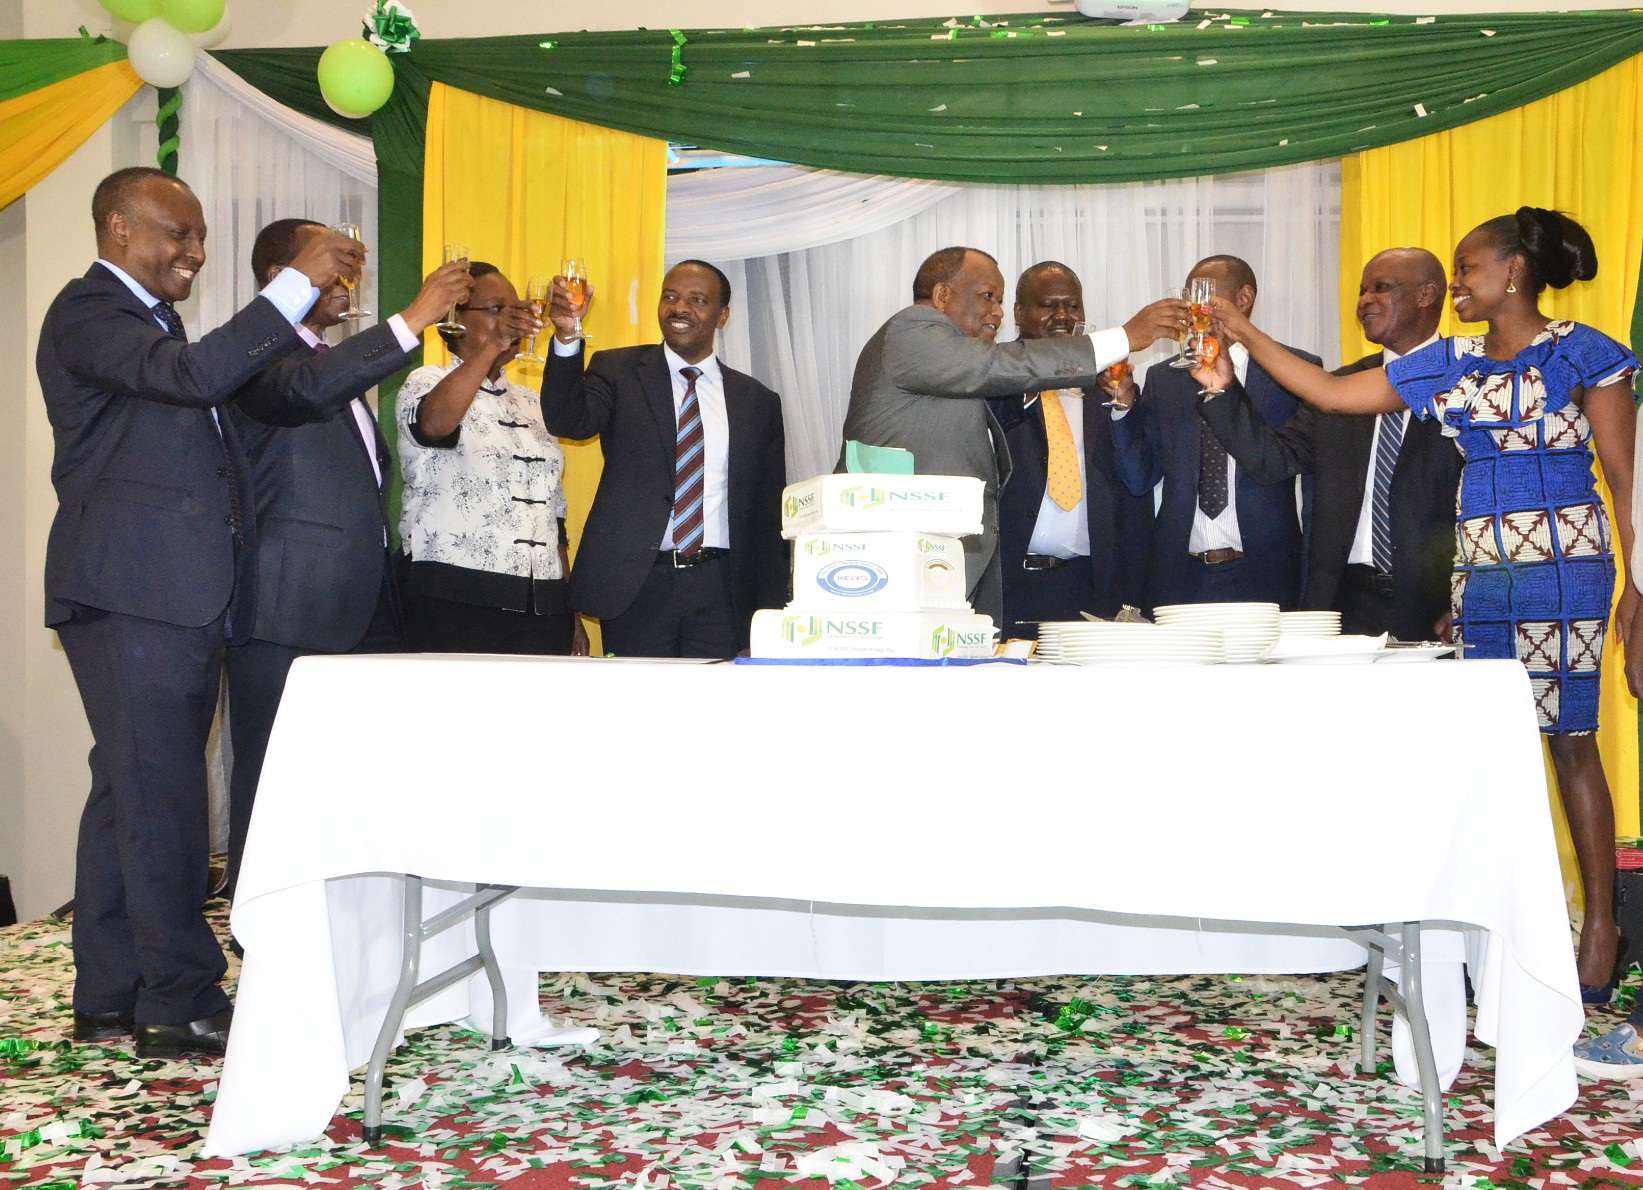 NSSF LAUNCHES CORPORATE STRATEGIC PLAN FOR THE YEAR 2019 – 2022